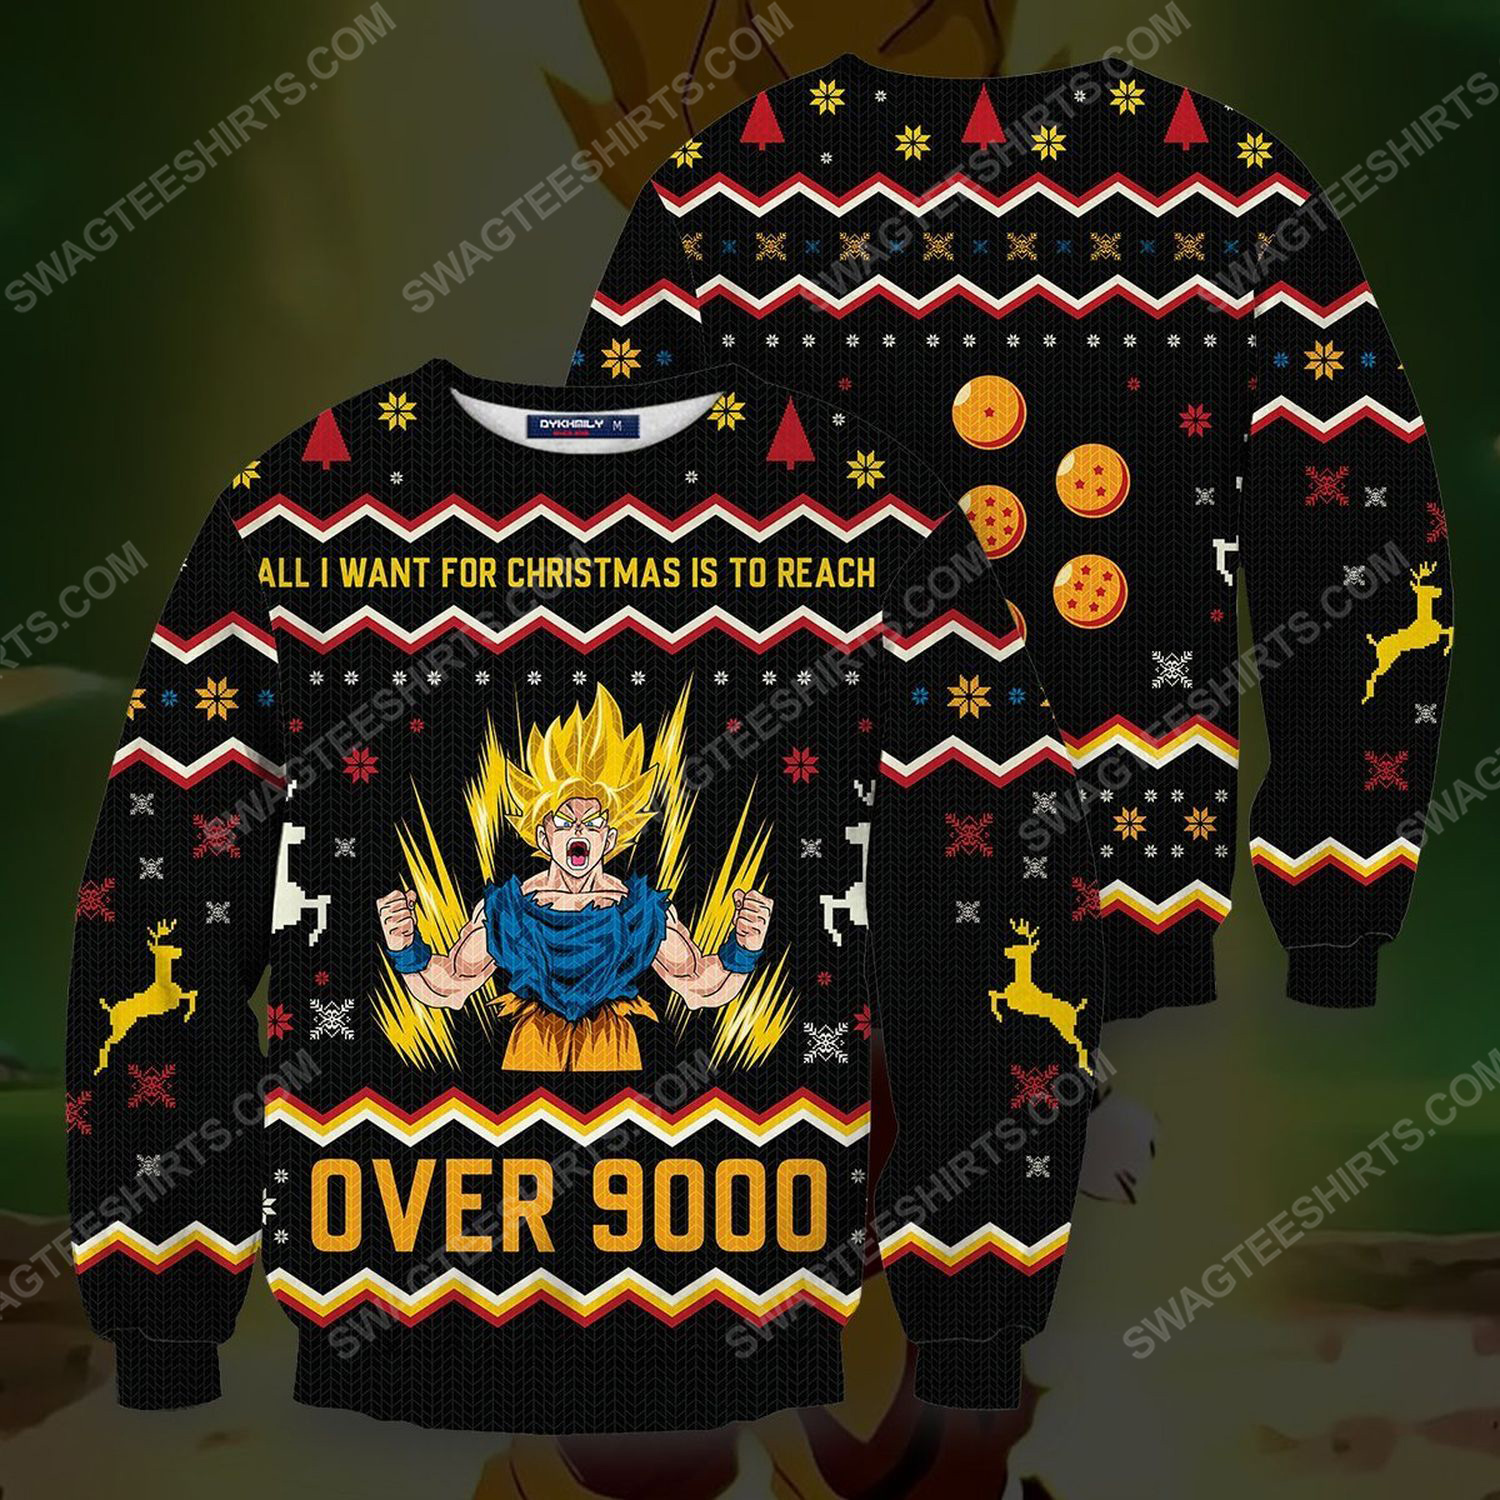 All i want for christmas is to reach over 9000 full print ugly christmas sweater 2